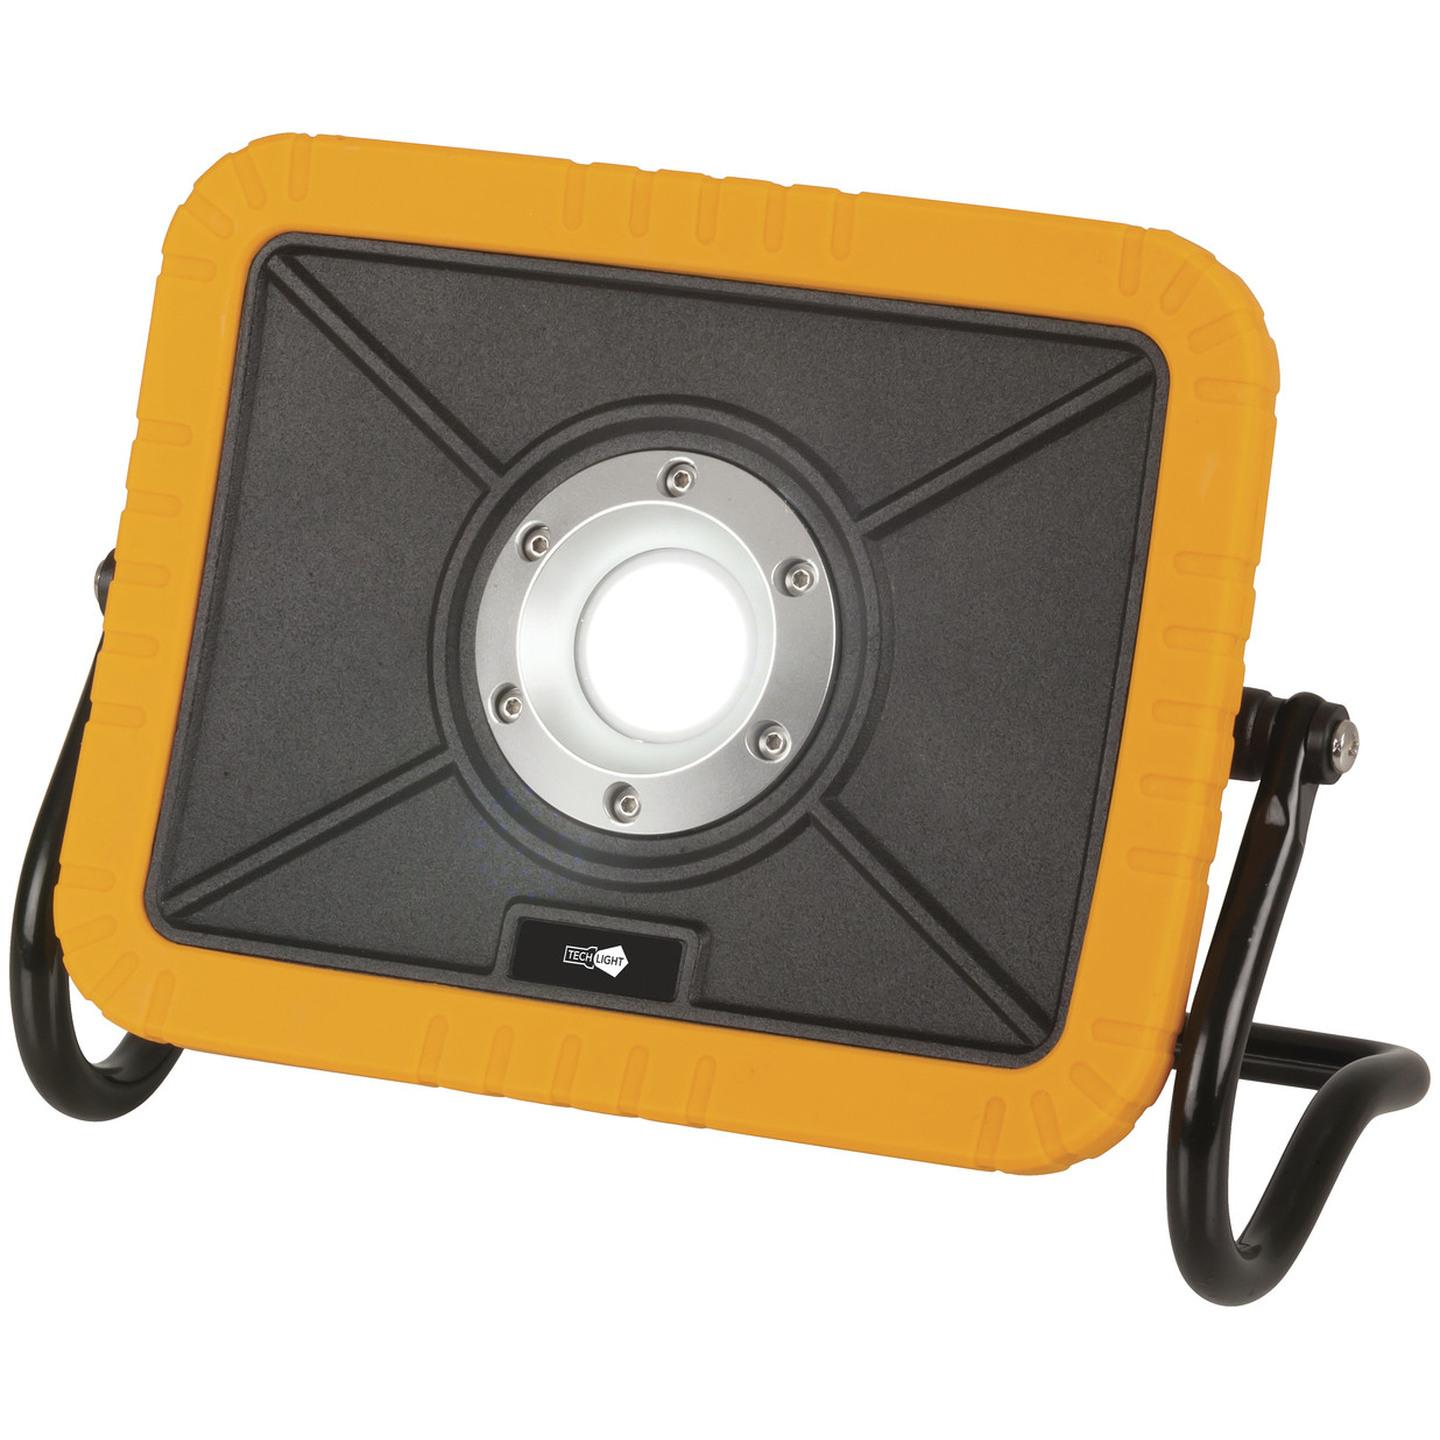 Rugged 20W 1800 Lumen LED Rechargeable Work Light